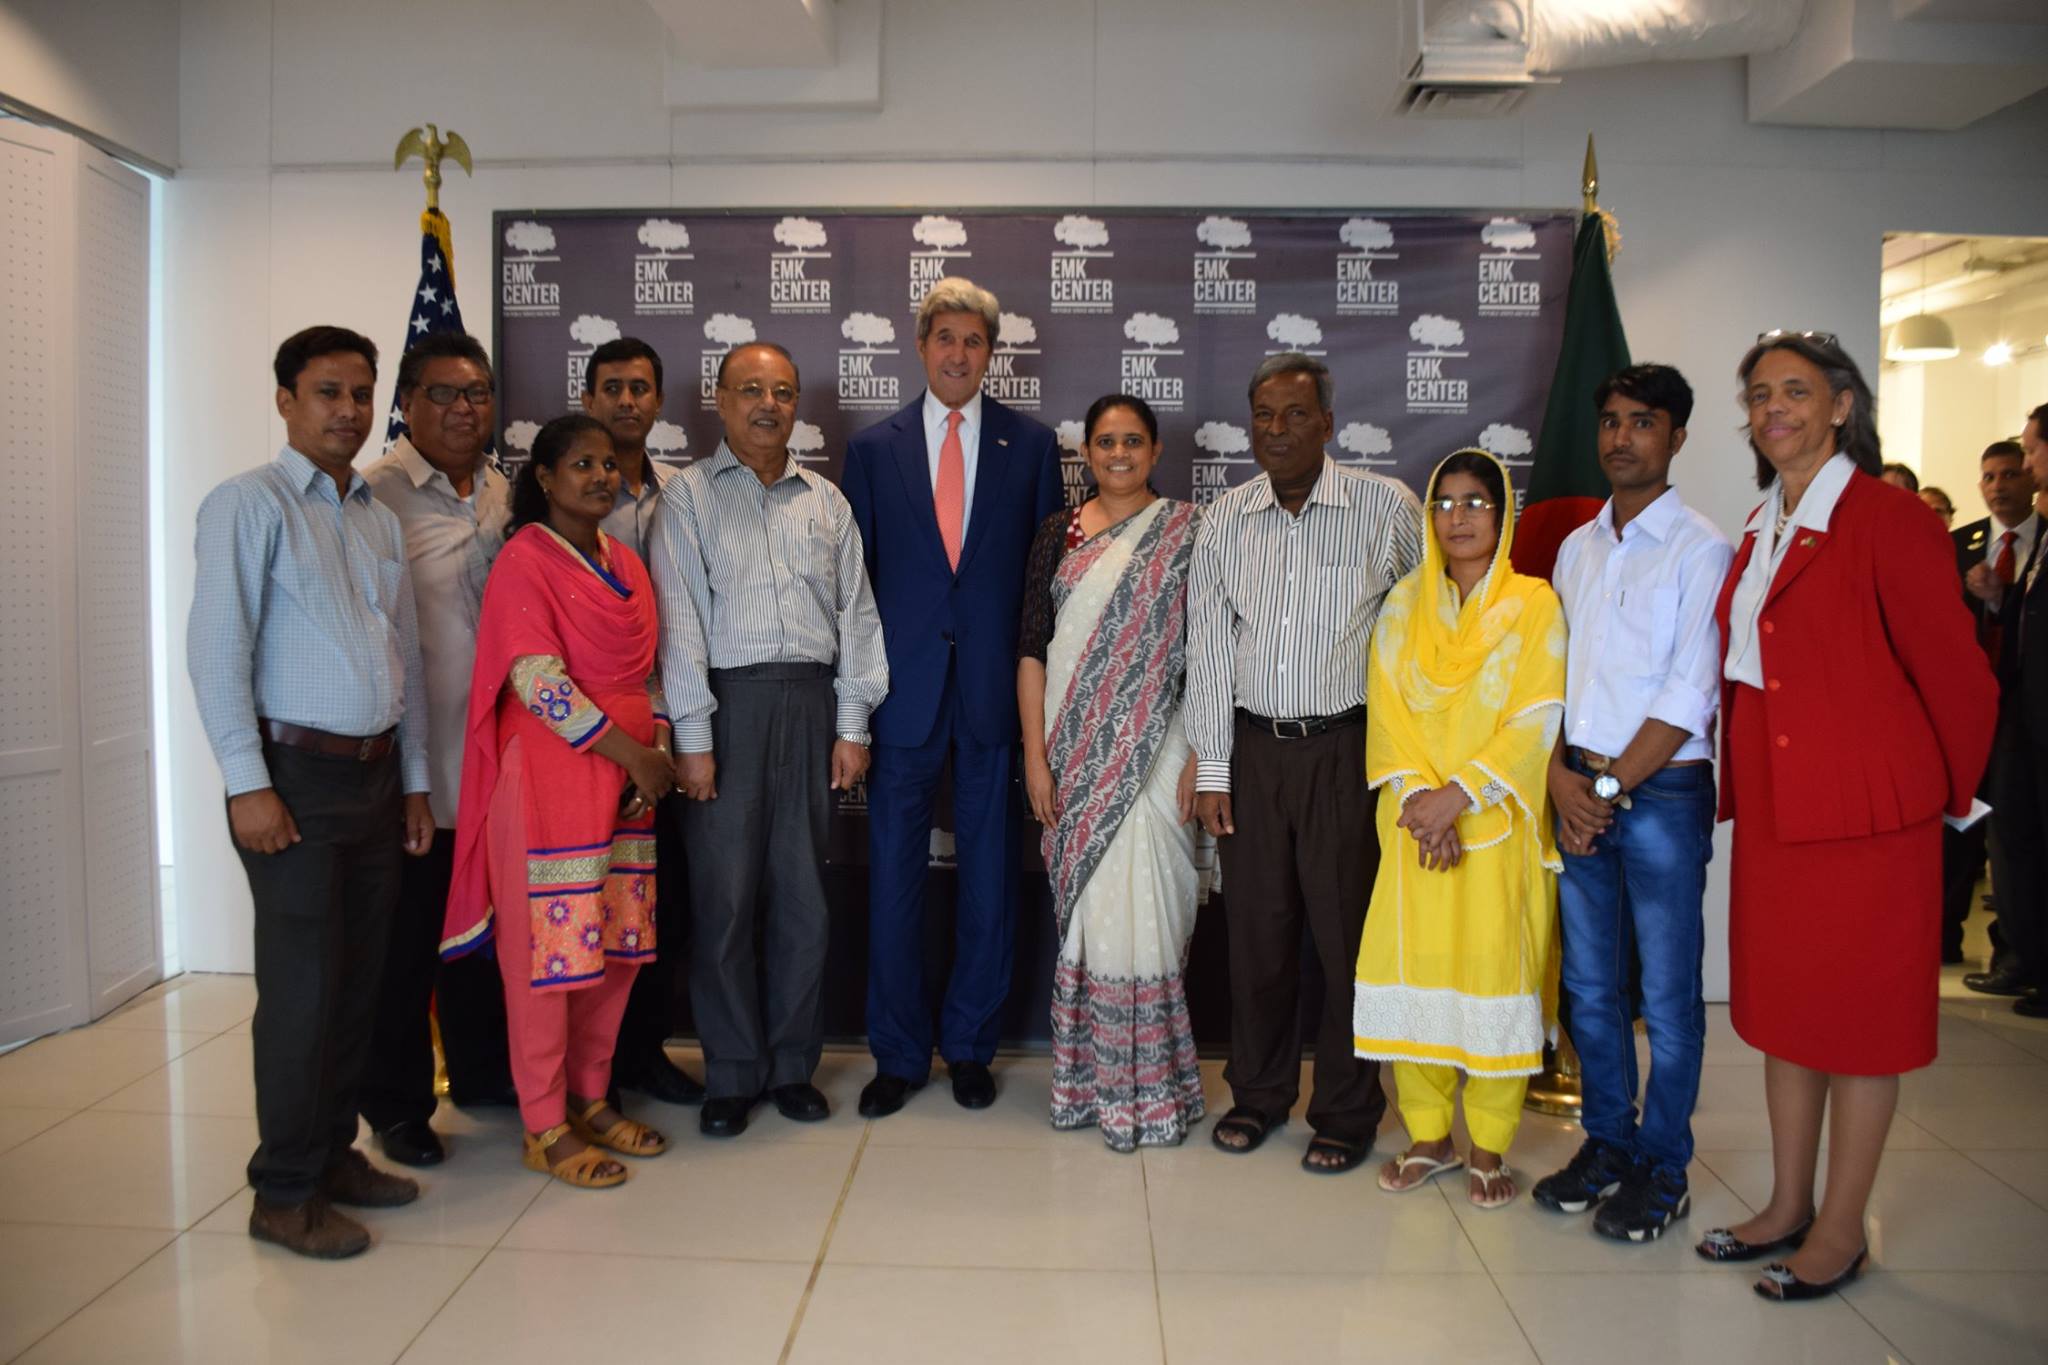 Bangladesh, John Kerry, Solidarity Center, garment workers, human rights, workplace safety and health